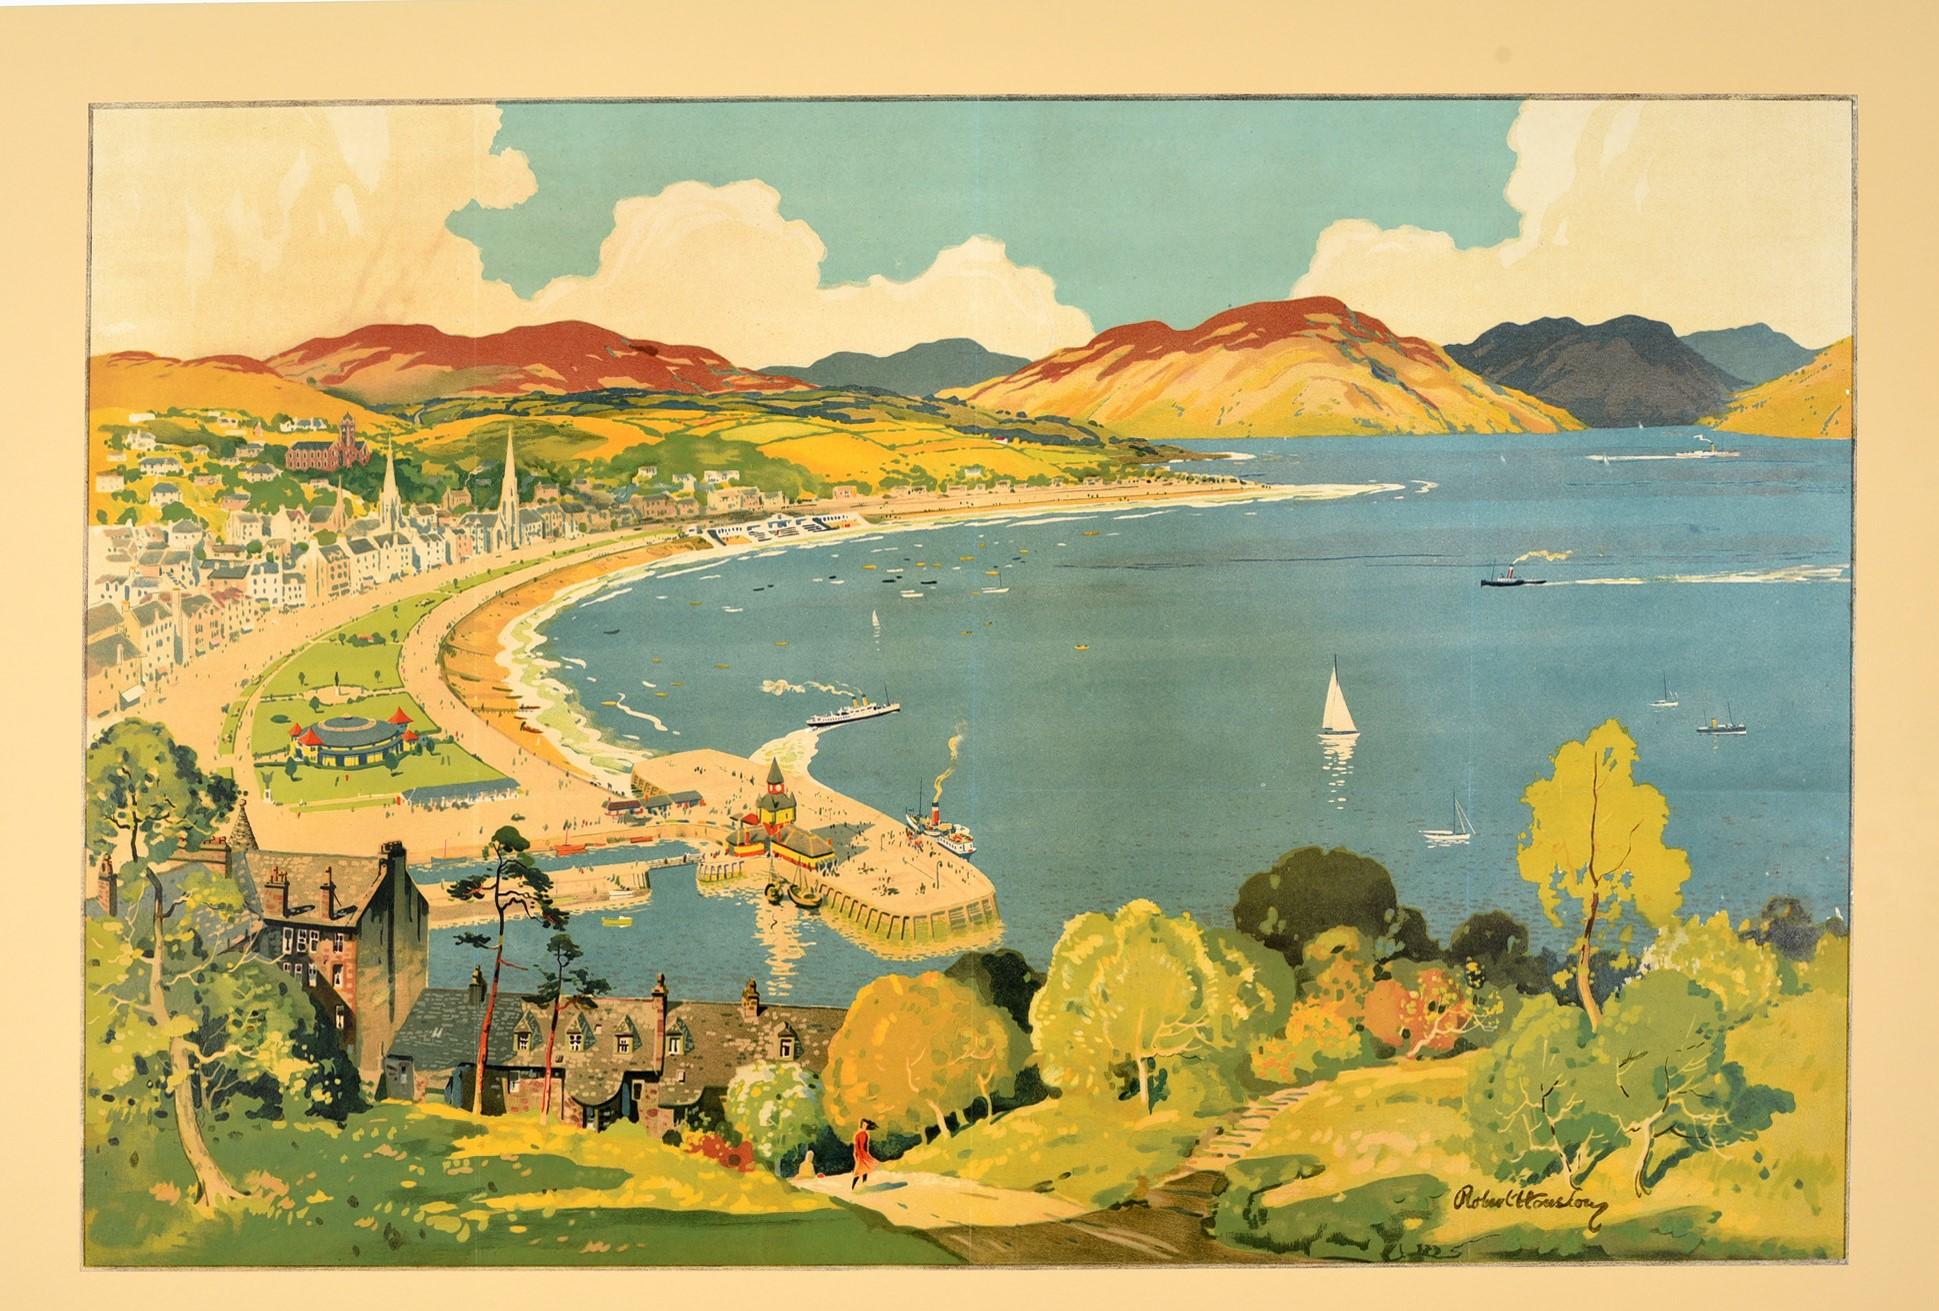 Original vintage travel poster for Royal Rothesay The Holiday Capital of the Clyde Coast issued by the London, Midland and Scottish Railway LMS and London North Eastern Railway LNER featuring scenic artwork by Robert Houston (1881-1940) of the